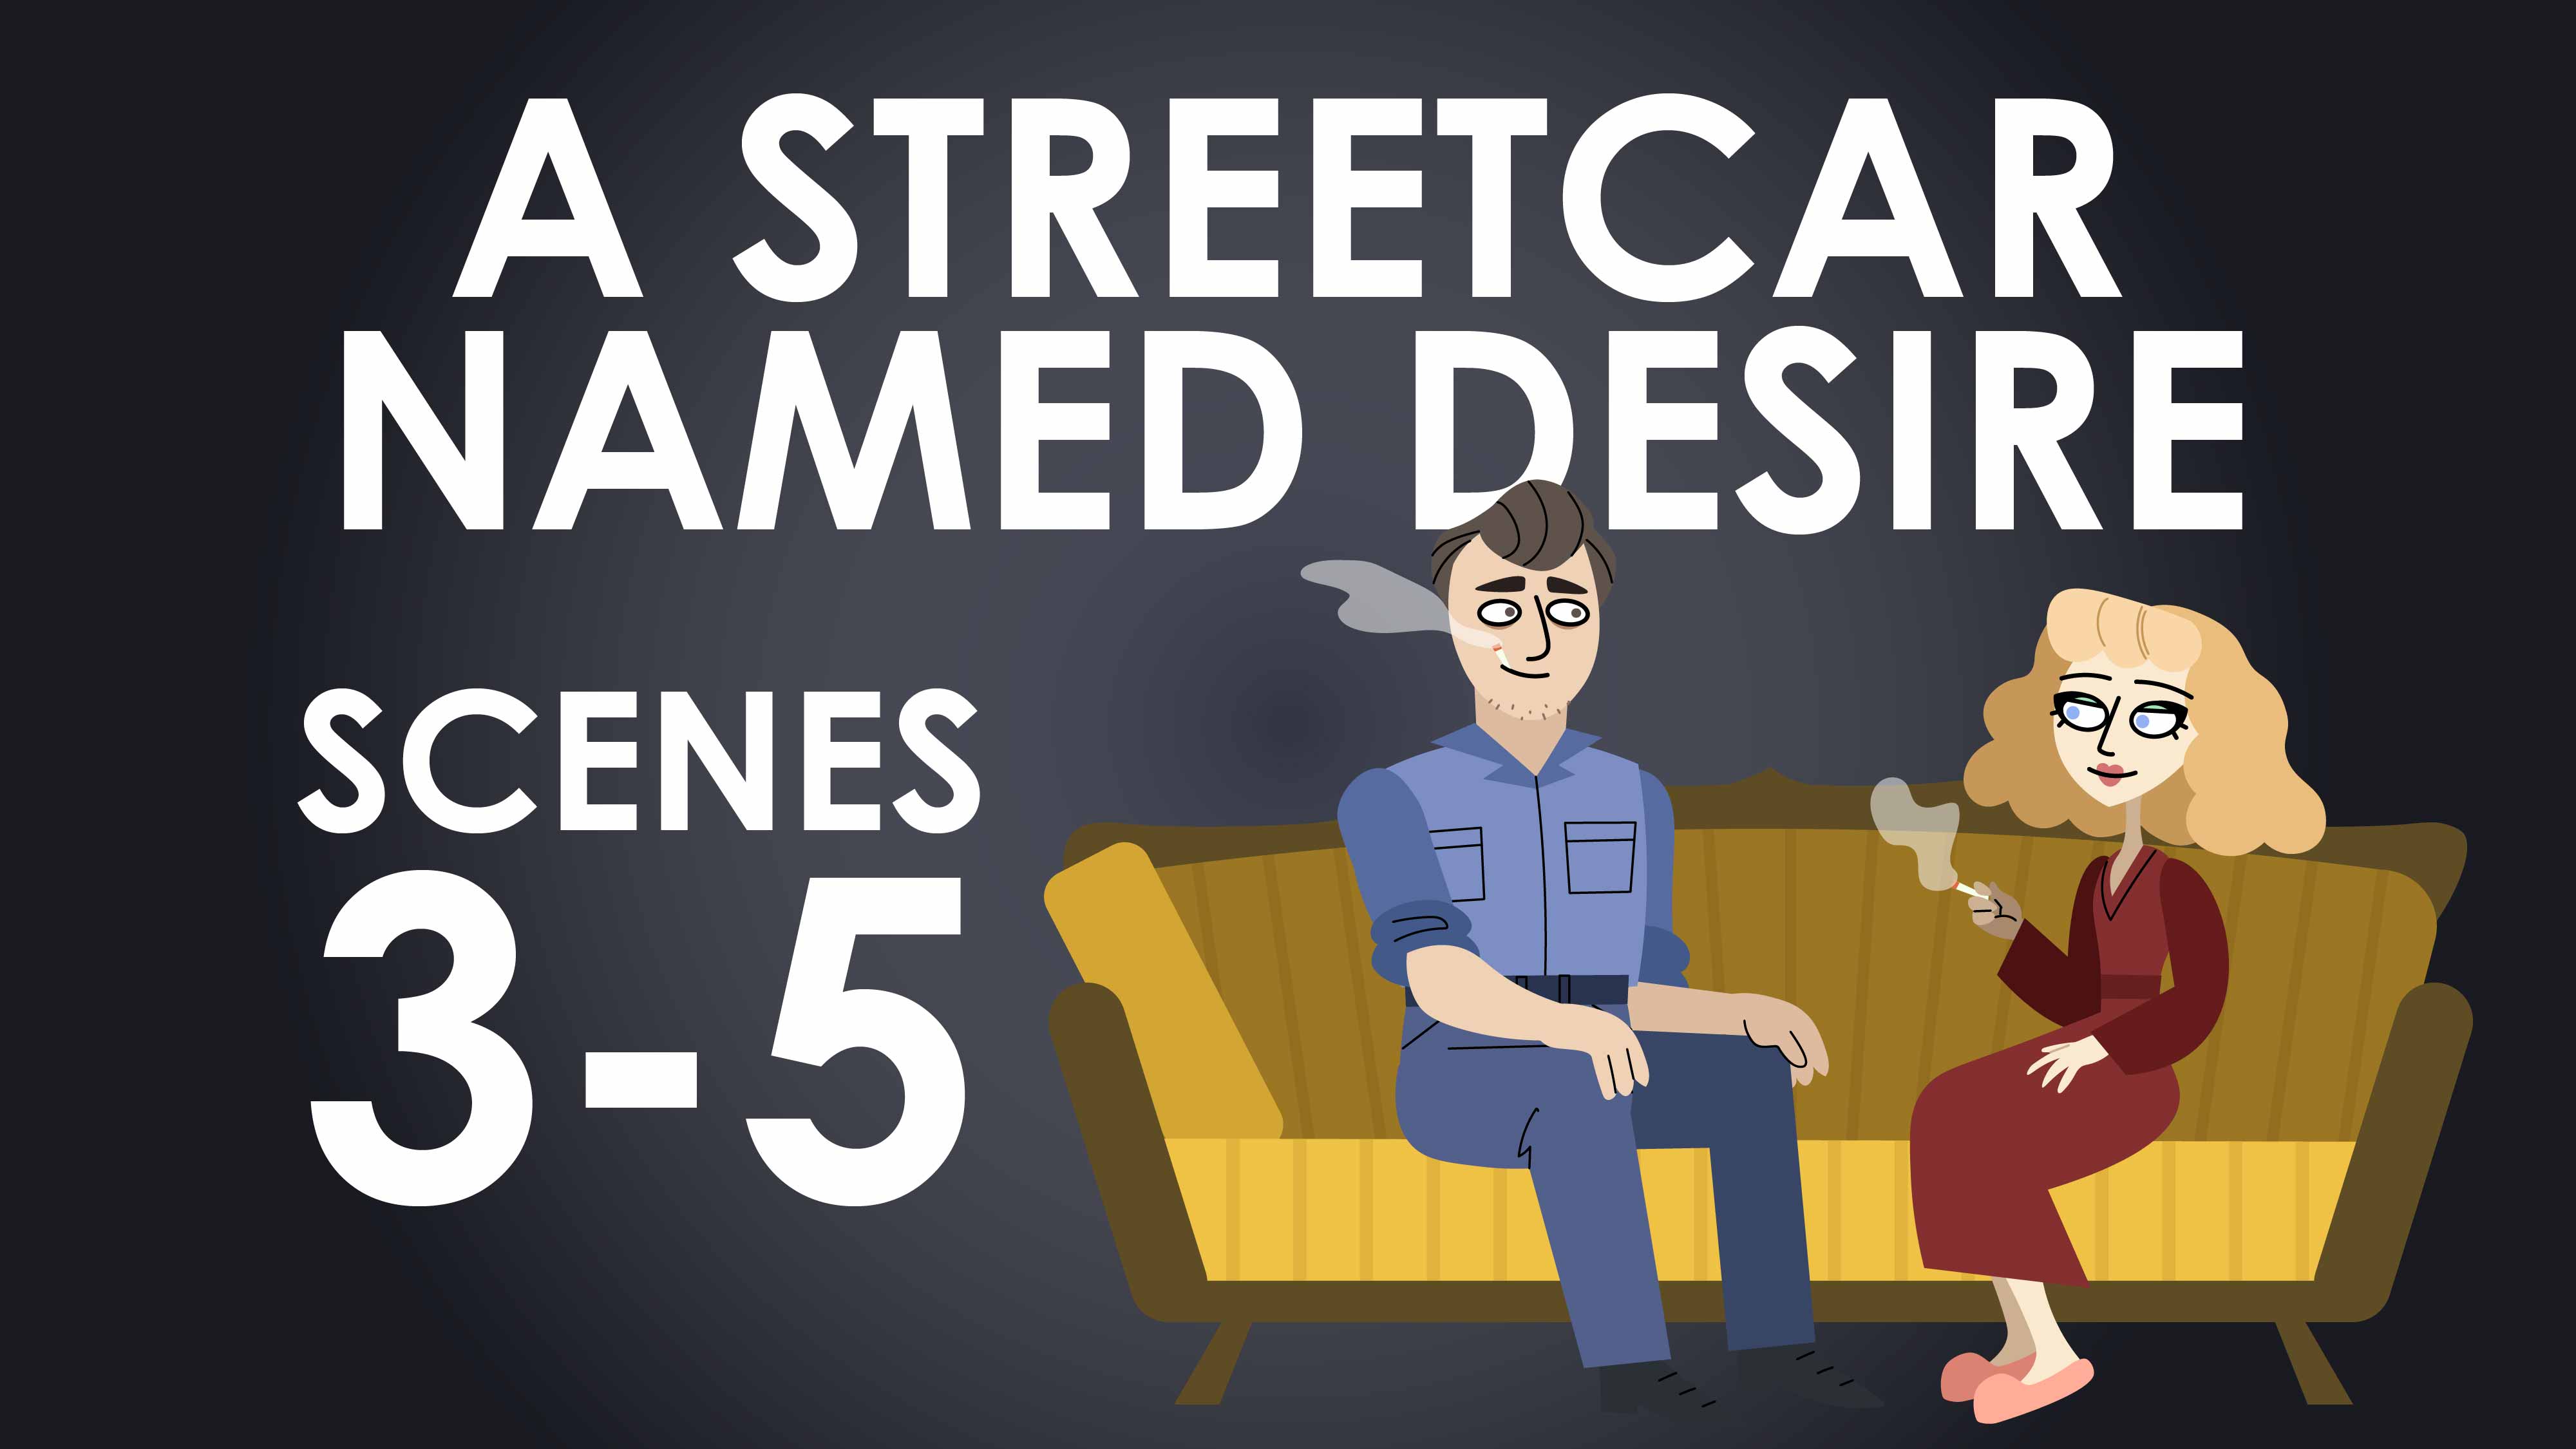 A Streetcar Named Desire - Tennessee Williams - Scenes 3-5 Summary - Destroying Drama Series	